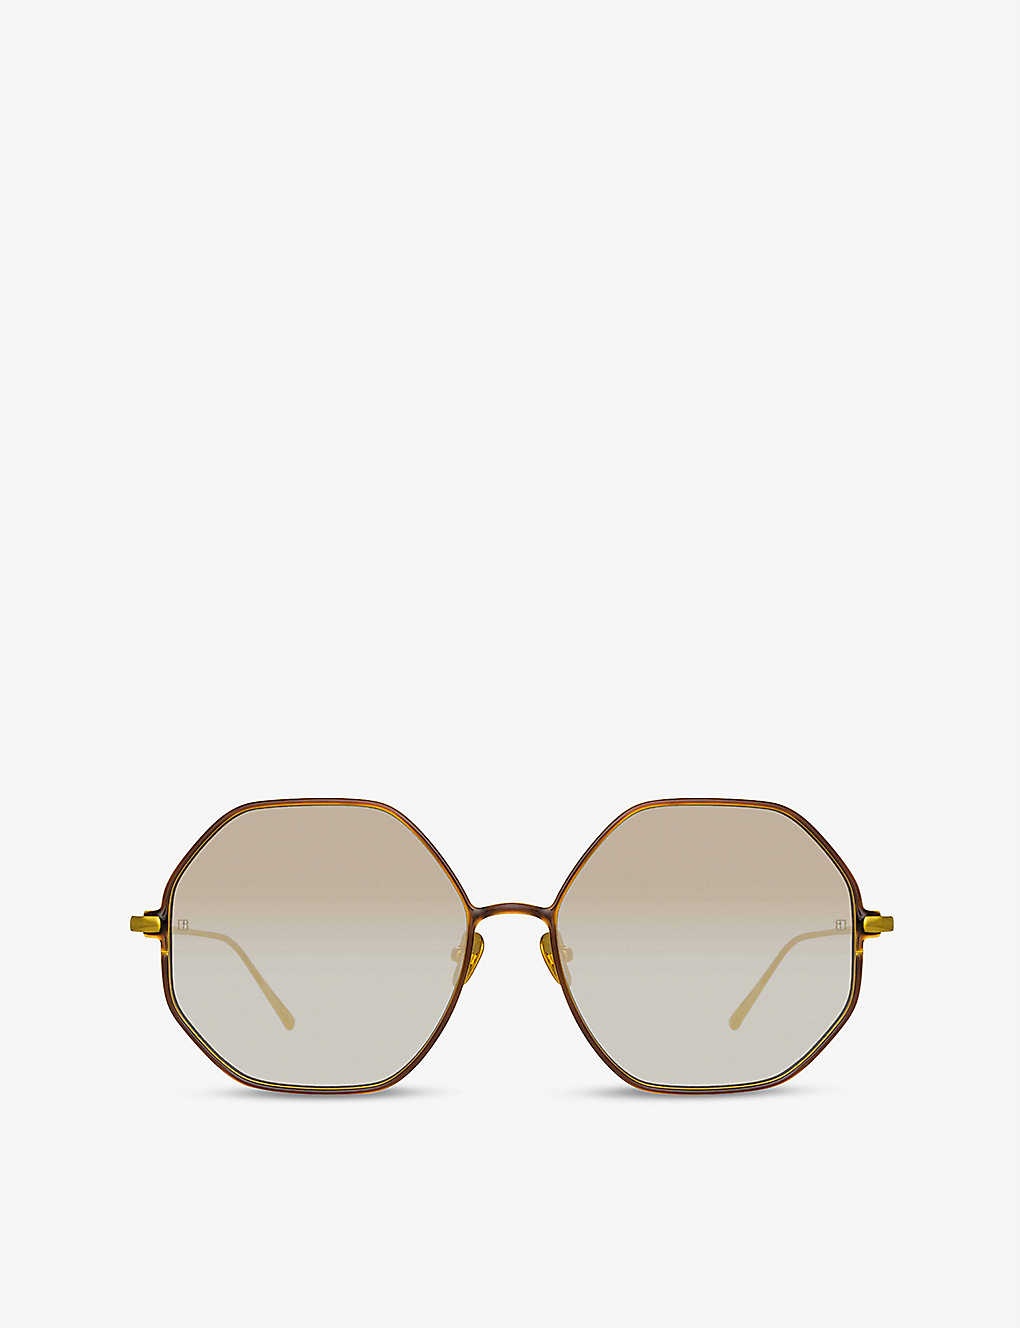 Leif 22ct yellow gold-plated titanium and lacquer hexagonal-frame sunglasses - 1